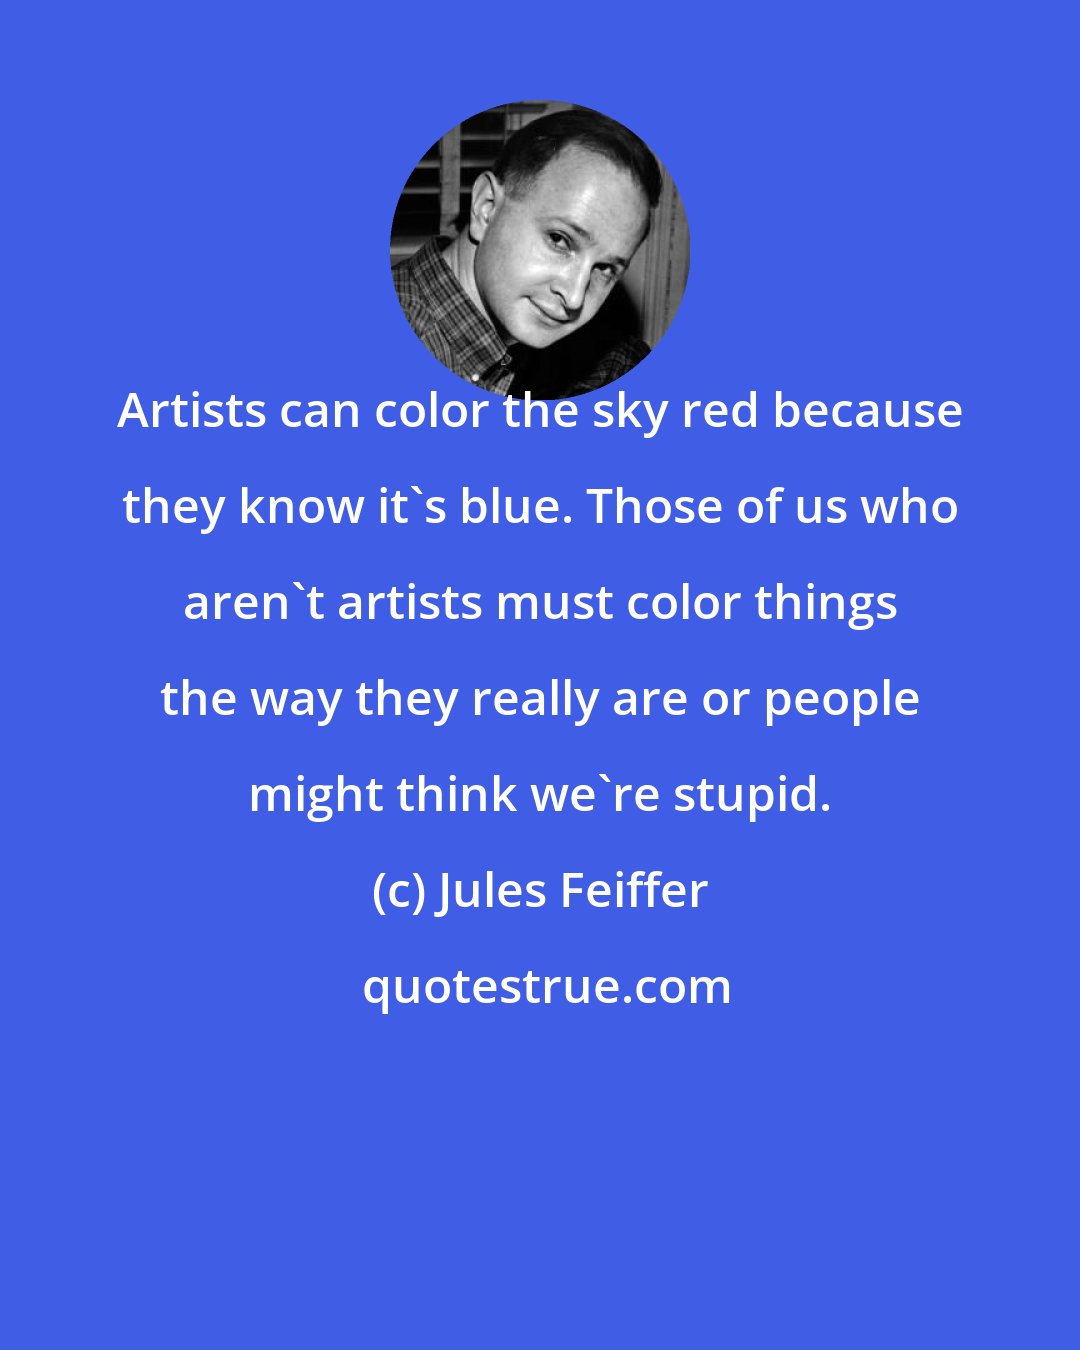 Jules Feiffer: Artists can color the sky red because they know it's blue. Those of us who aren't artists must color things the way they really are or people might think we're stupid.